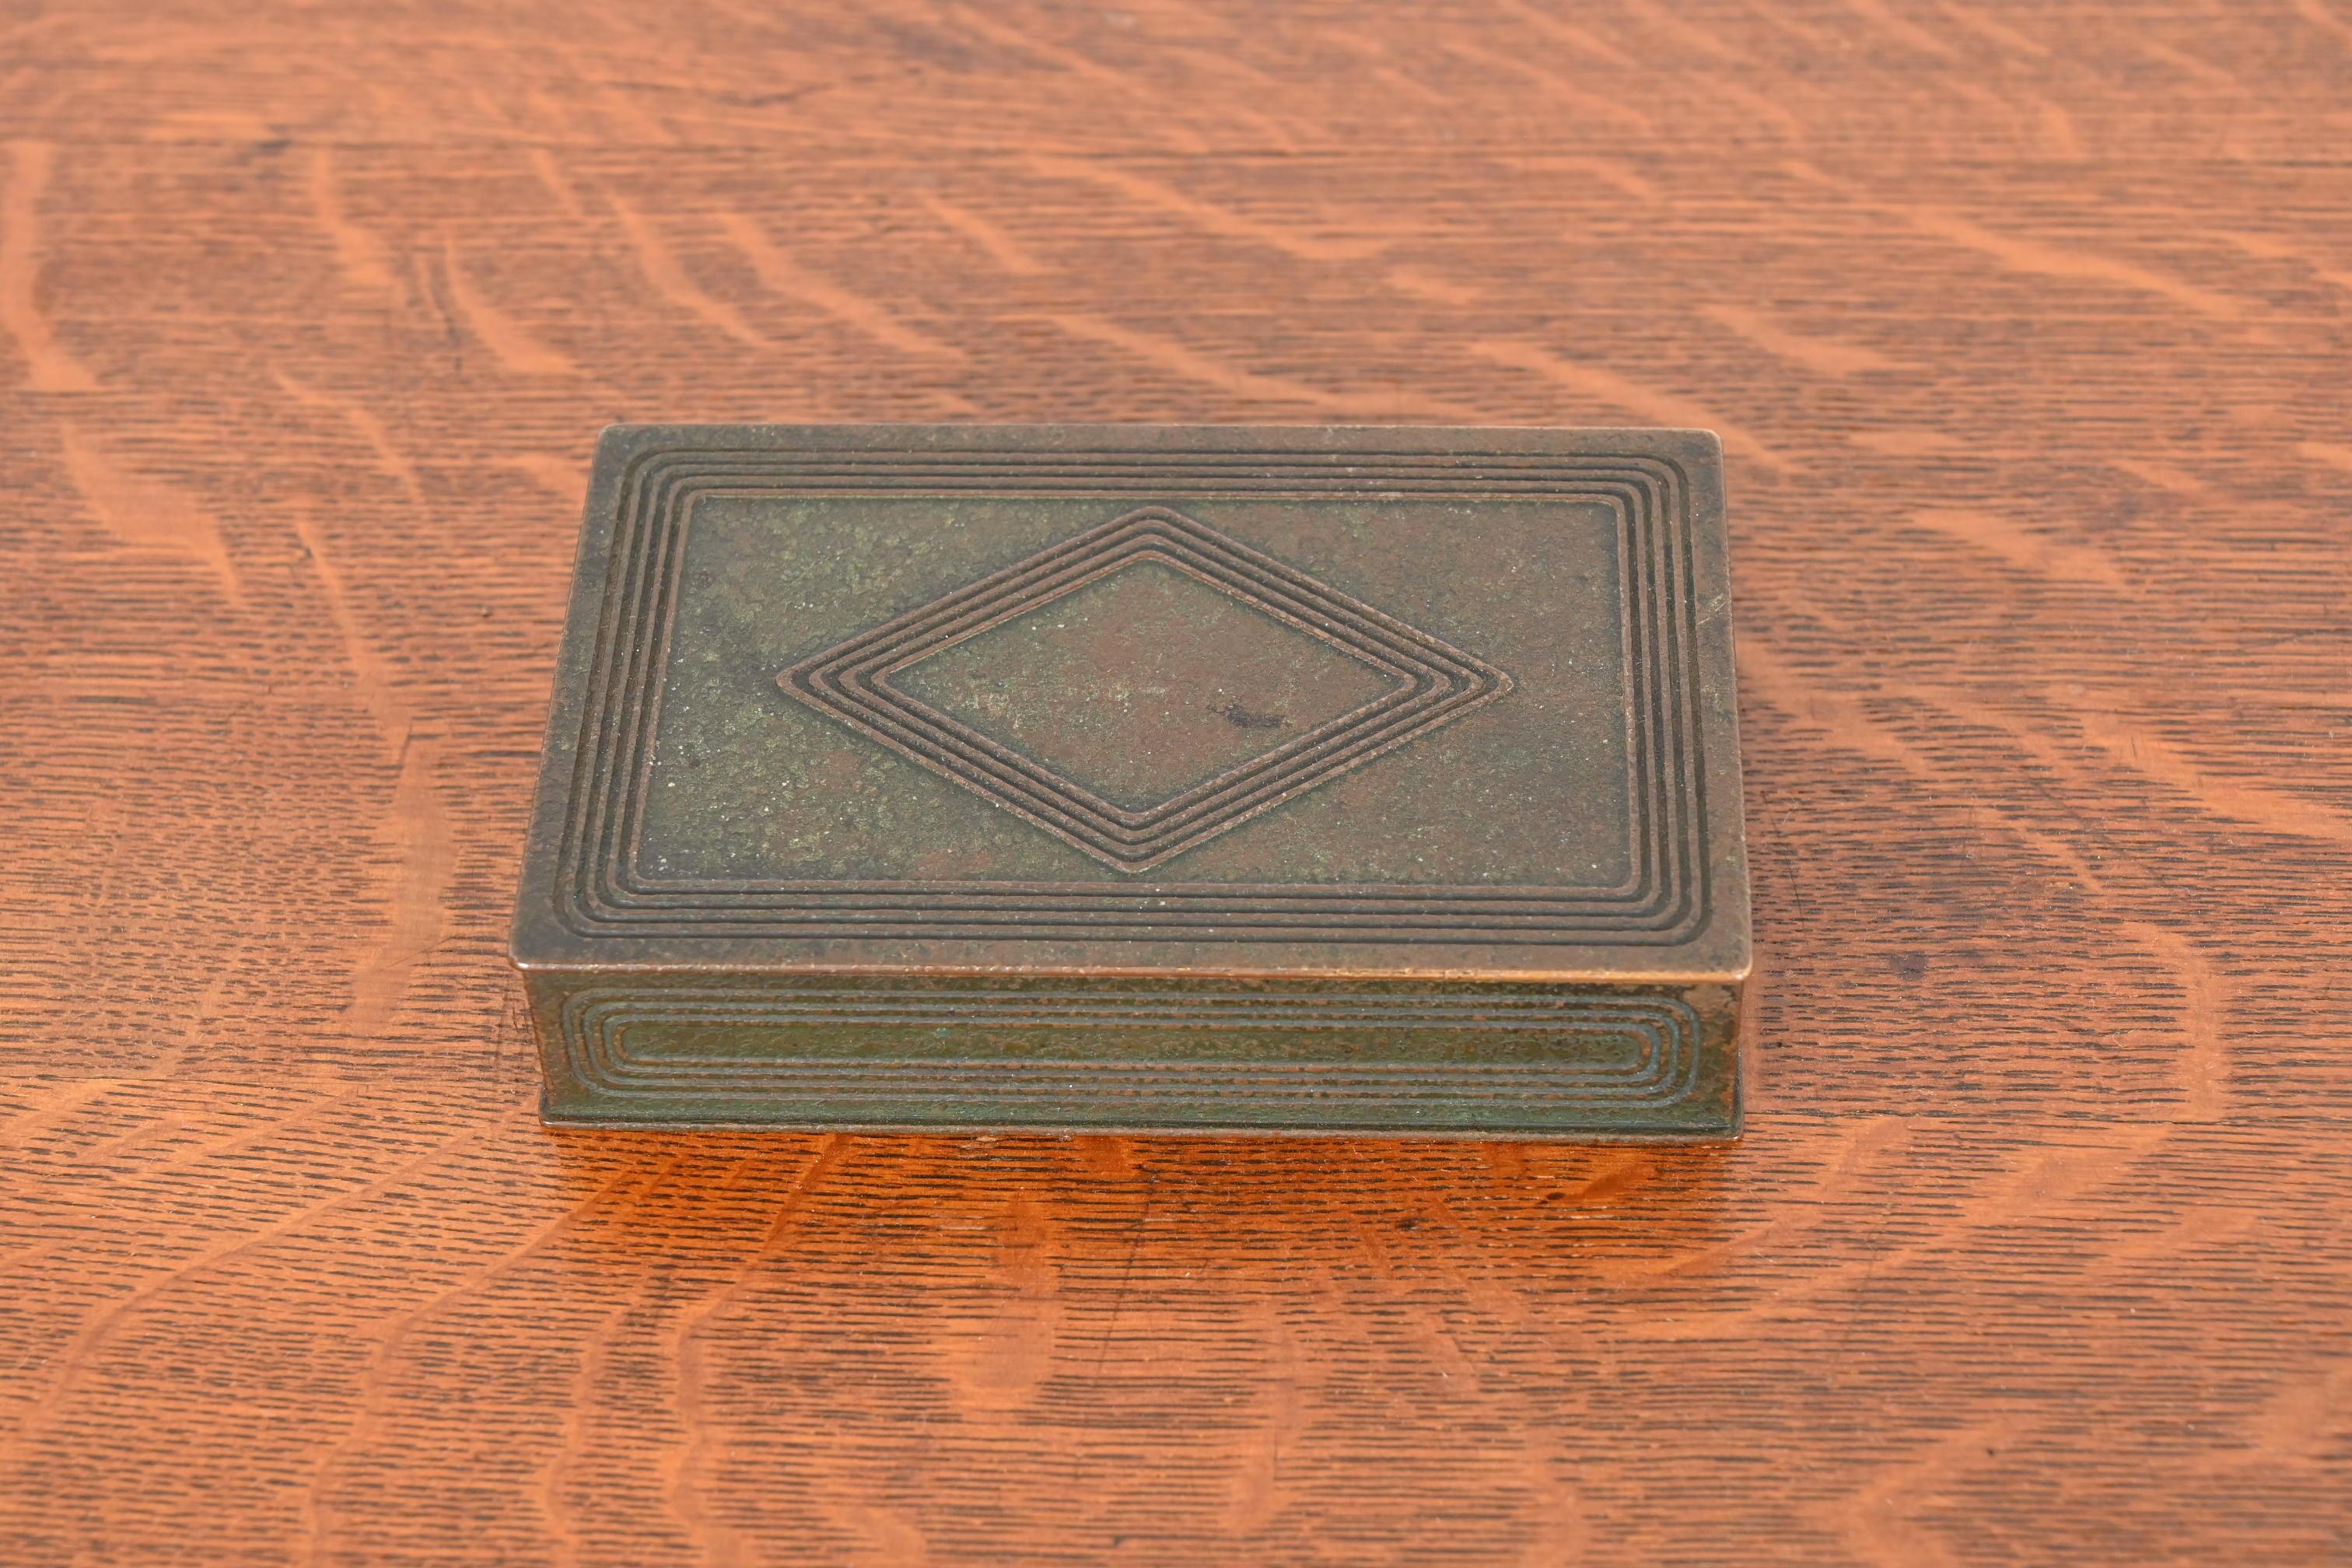 A gorgeous antique bronze Graduate pattern desk box, jewelry box, or decorative box with verdigris green patina

By Tiffany Studios (signed to the underside)

New York, USA, Early 20th Century

Measures: 5.5